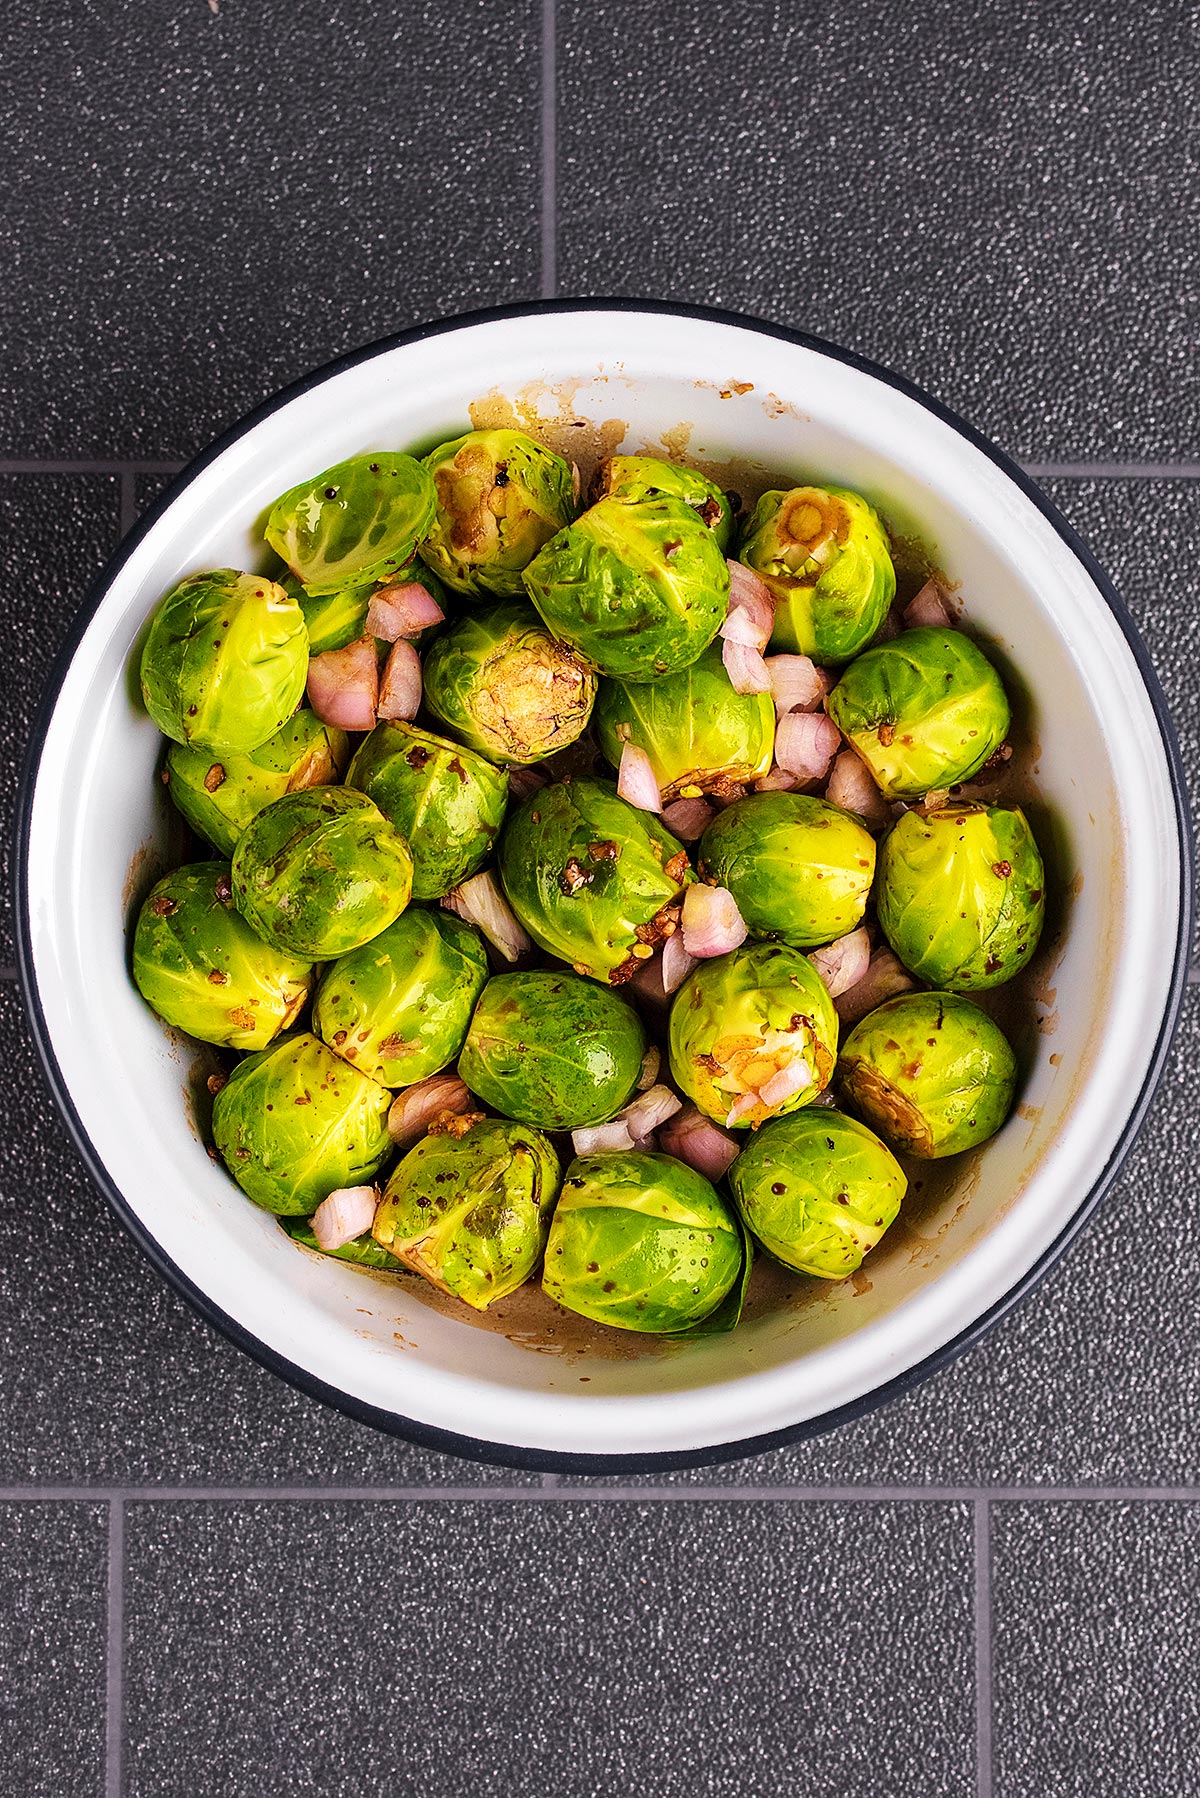 A circular baking dish containing Brussels sprouts, garlic and balsamic vinegar.